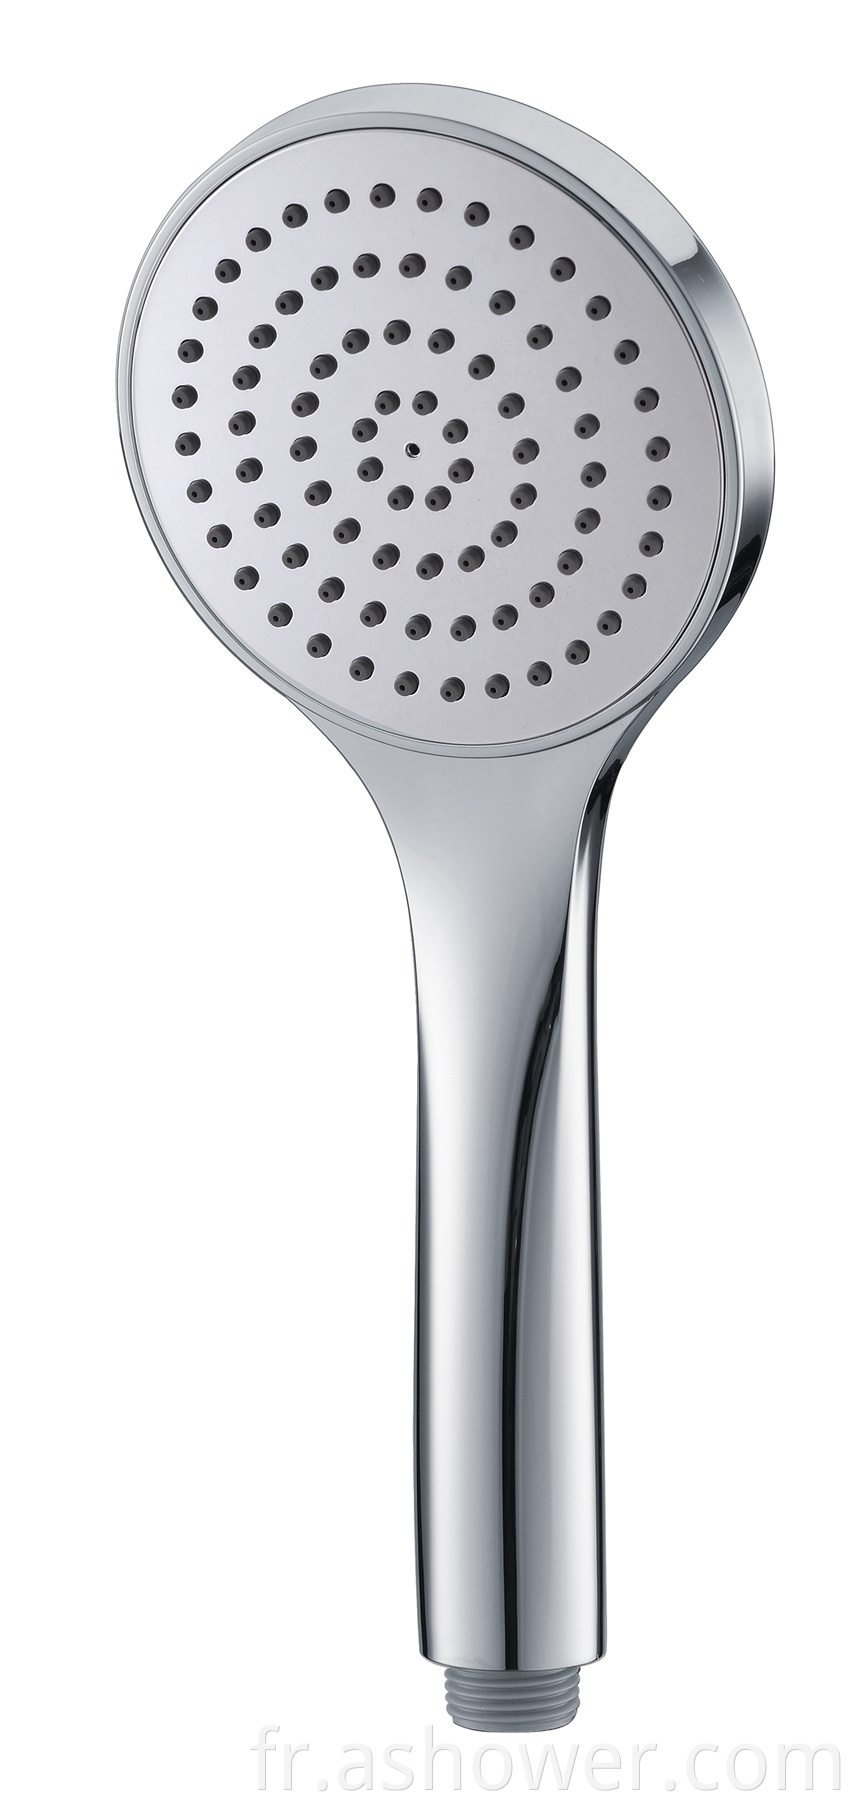 Abs Plastic 1 Function Hand Shower